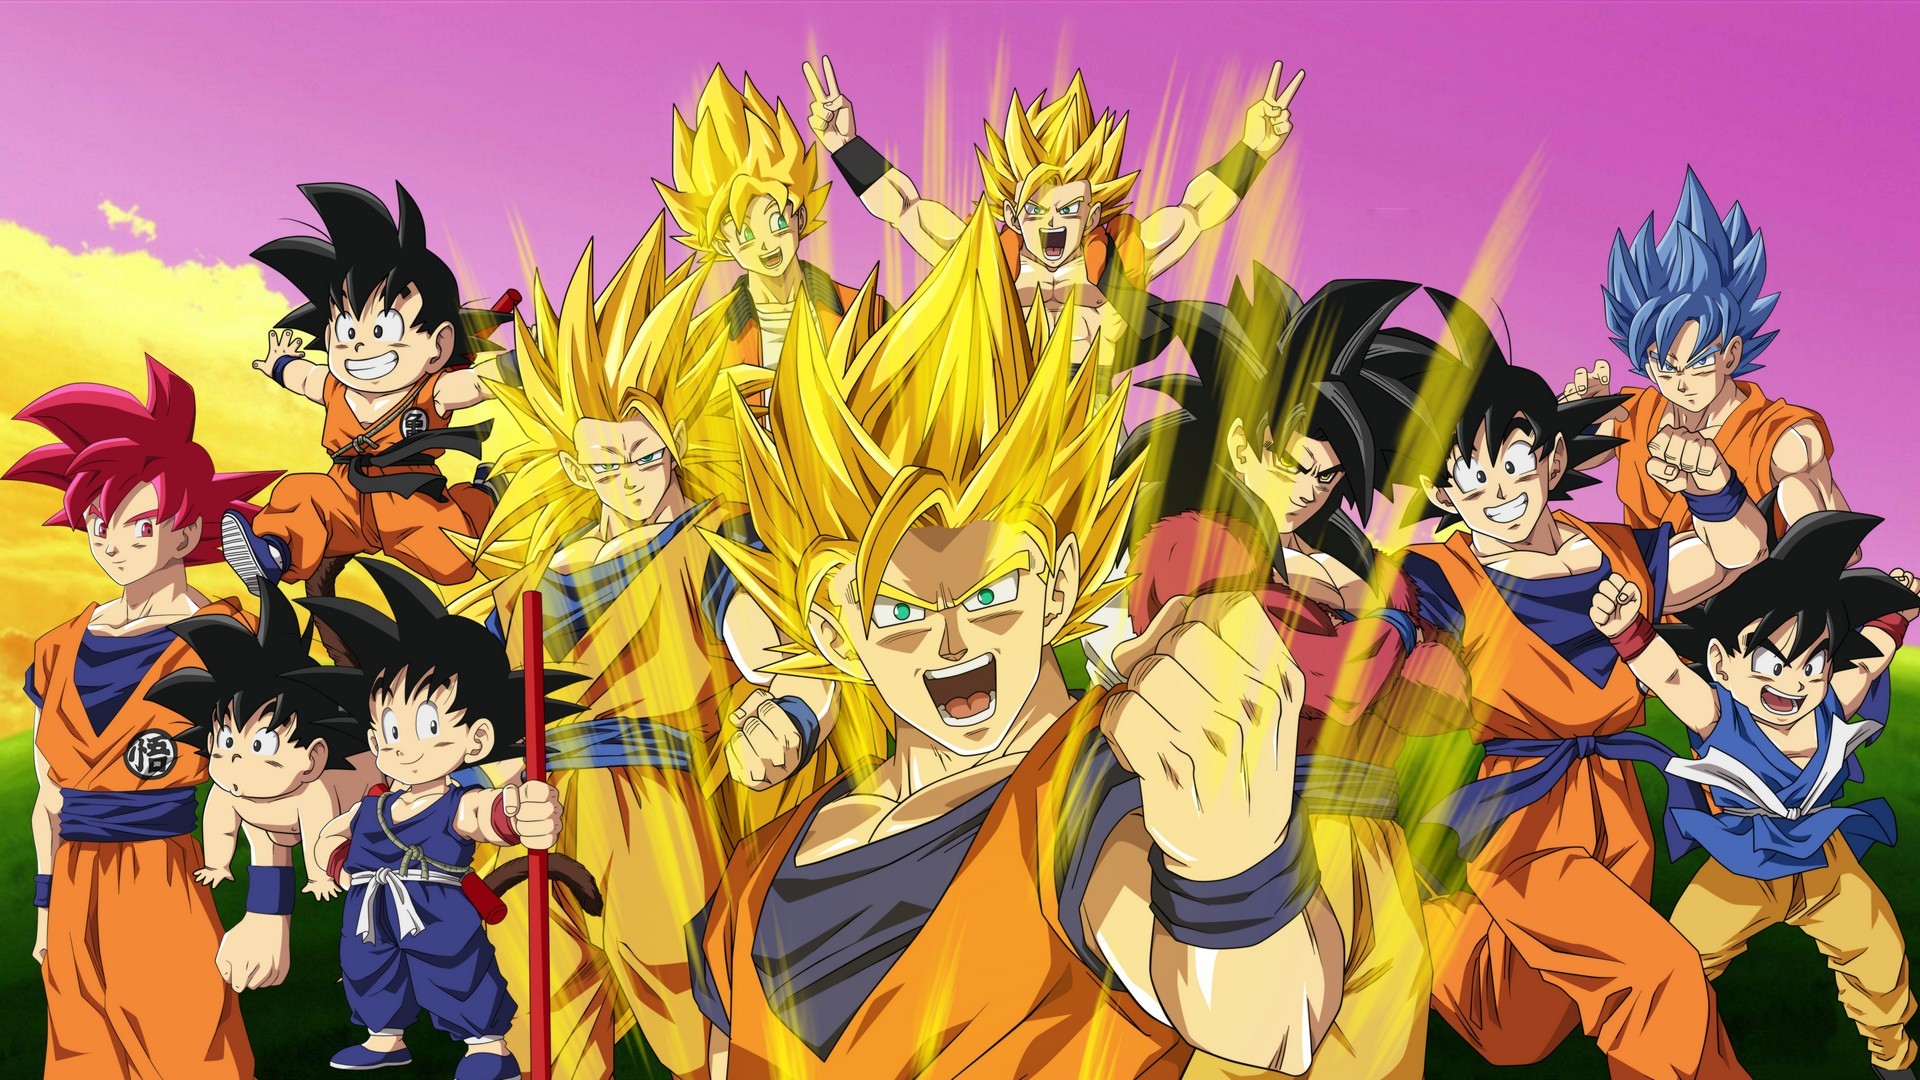 Goku Wallpaper For Desktop with image resolution 1920x1080 pixel. You can use this wallpaper as background for your desktop Computer Screensavers, Android or iPhone smartphones